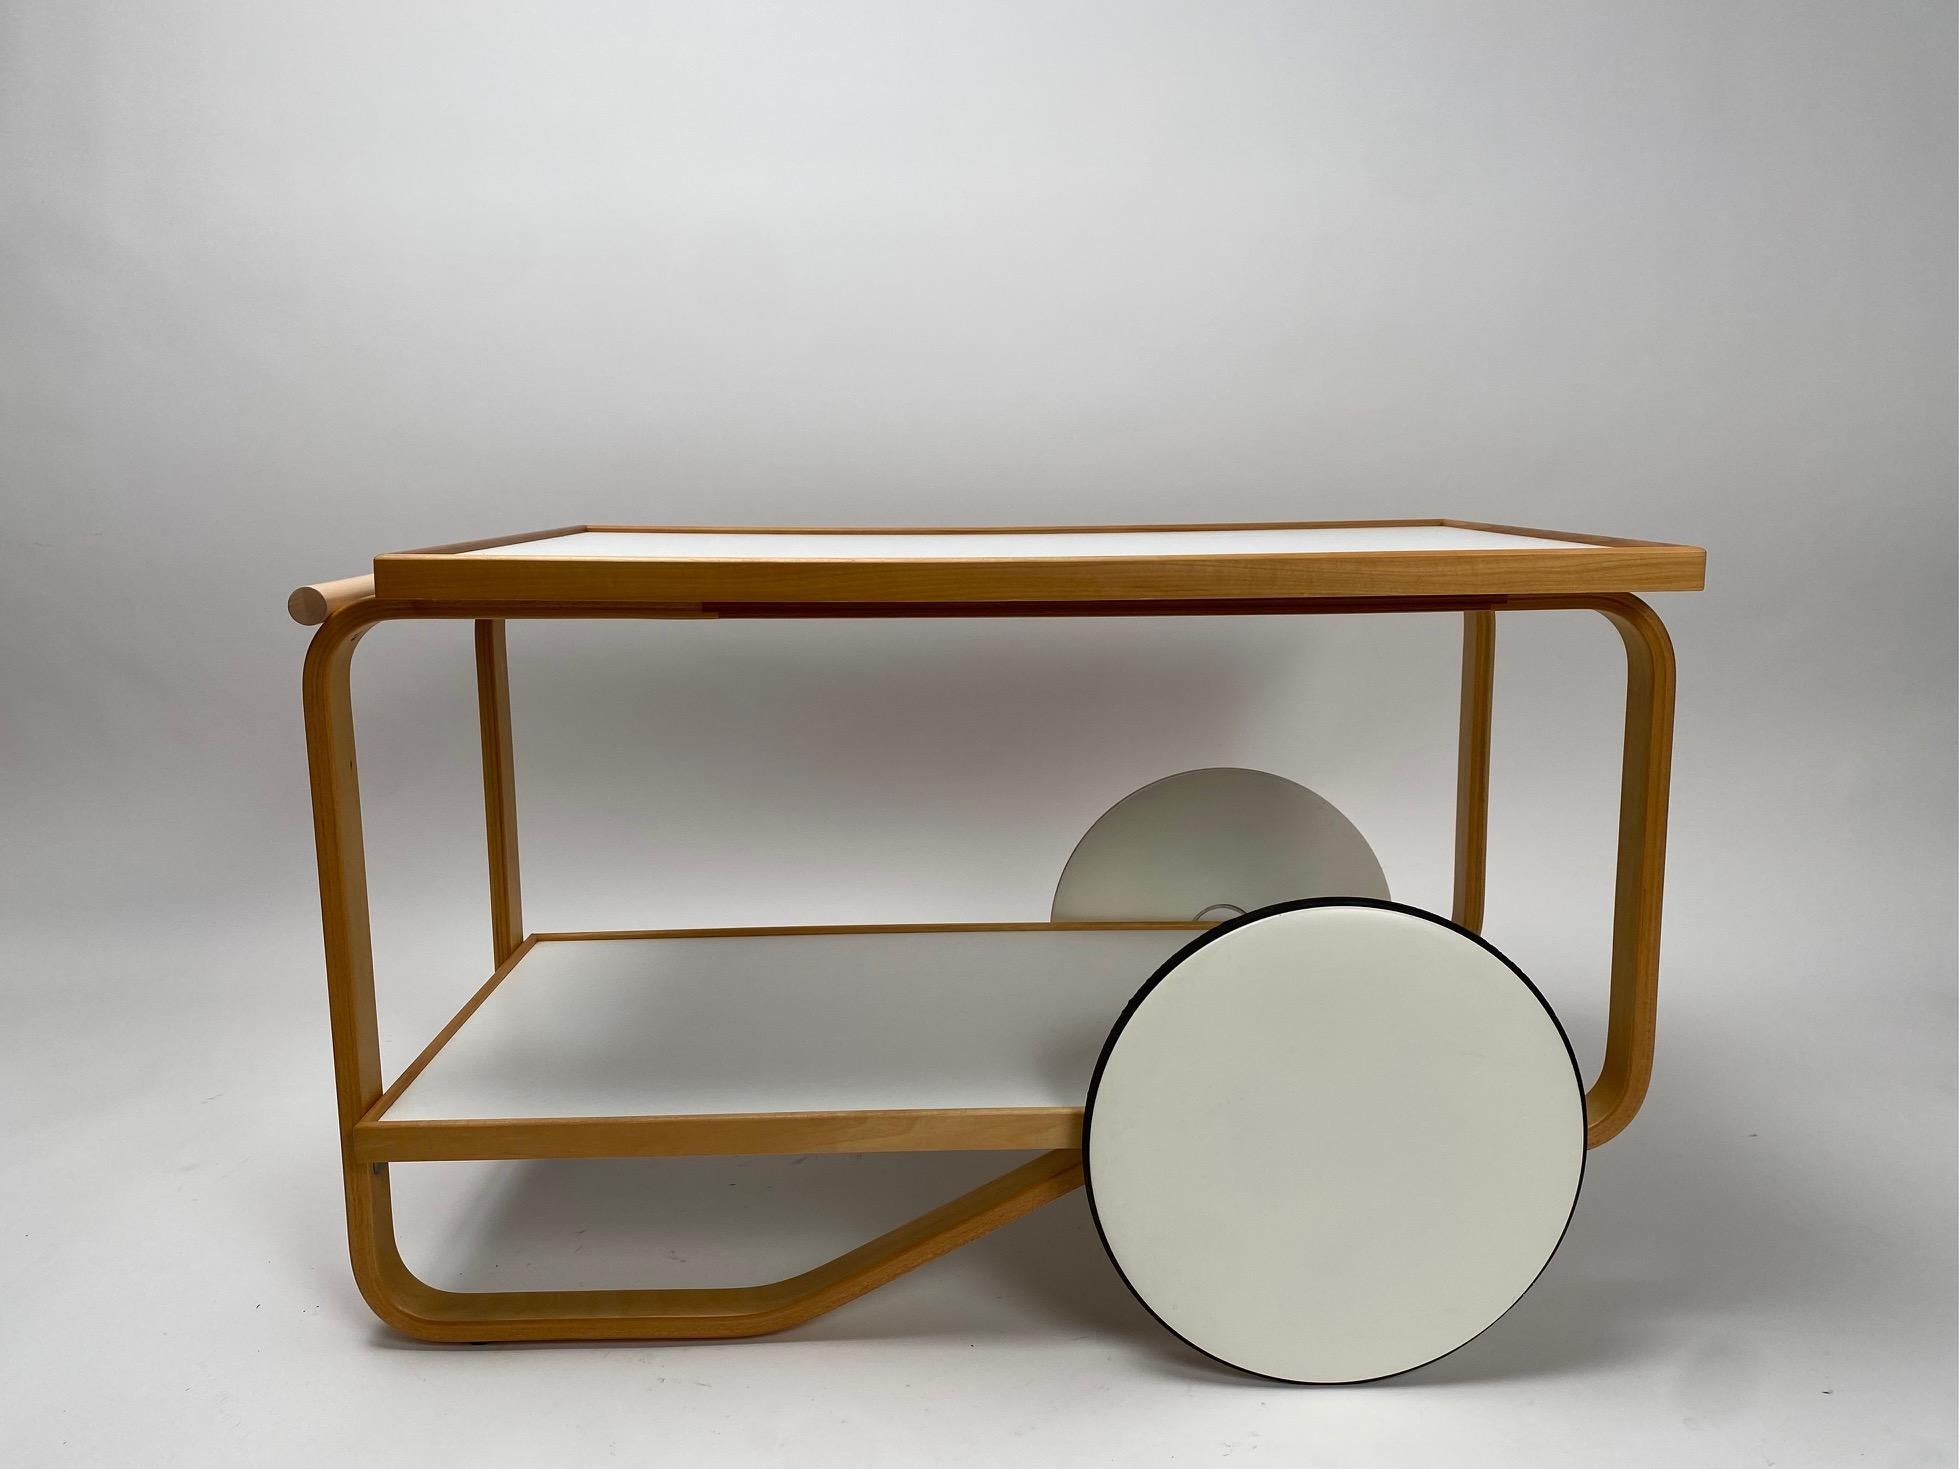 Alvar Aalto's 901 trolley is one of the icons of Finnish modern design, presented for the first time at the Milan Triennale in 1936.
  The bar or tea trolley features a birch wood frame and white linoleum-covered trays.
Soberly elegant, the Aalto